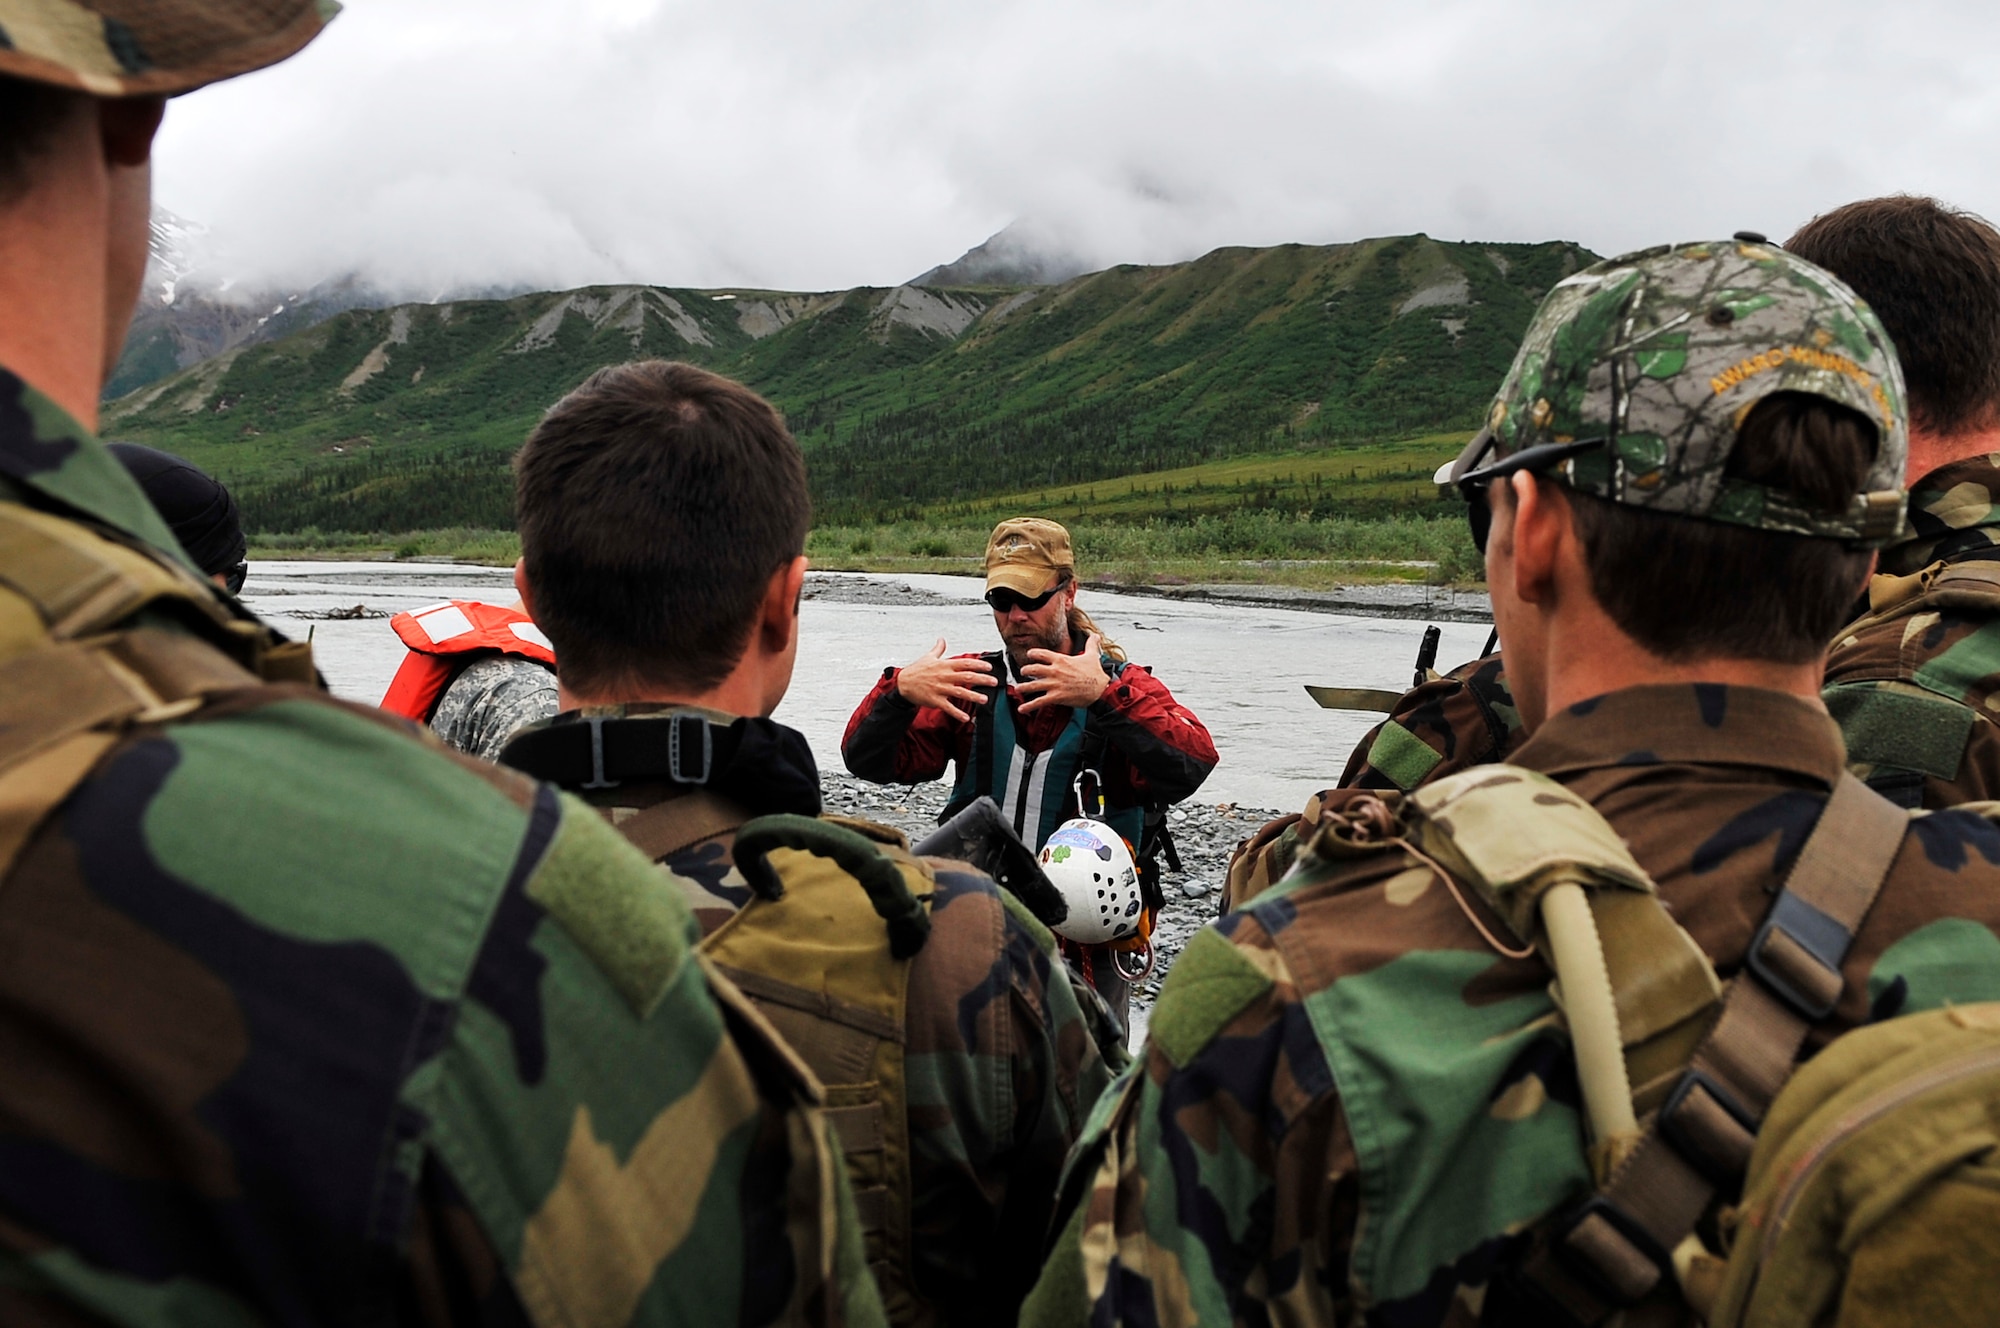 Steven Decker briefs a group of Navy SEALs river crossing and rope techniques during a training exercise at Phelan Creek during NORTHERN EDGE 2009, June 17. NE09 is a large scale exercise hosted in Alaska to improve command, control and communications between the Armed Services. Mr. Decker is an instructor at the Northern Warfare Training Center. (U.S. Air Force photo/Staff Sgt. Christopher Boitz)